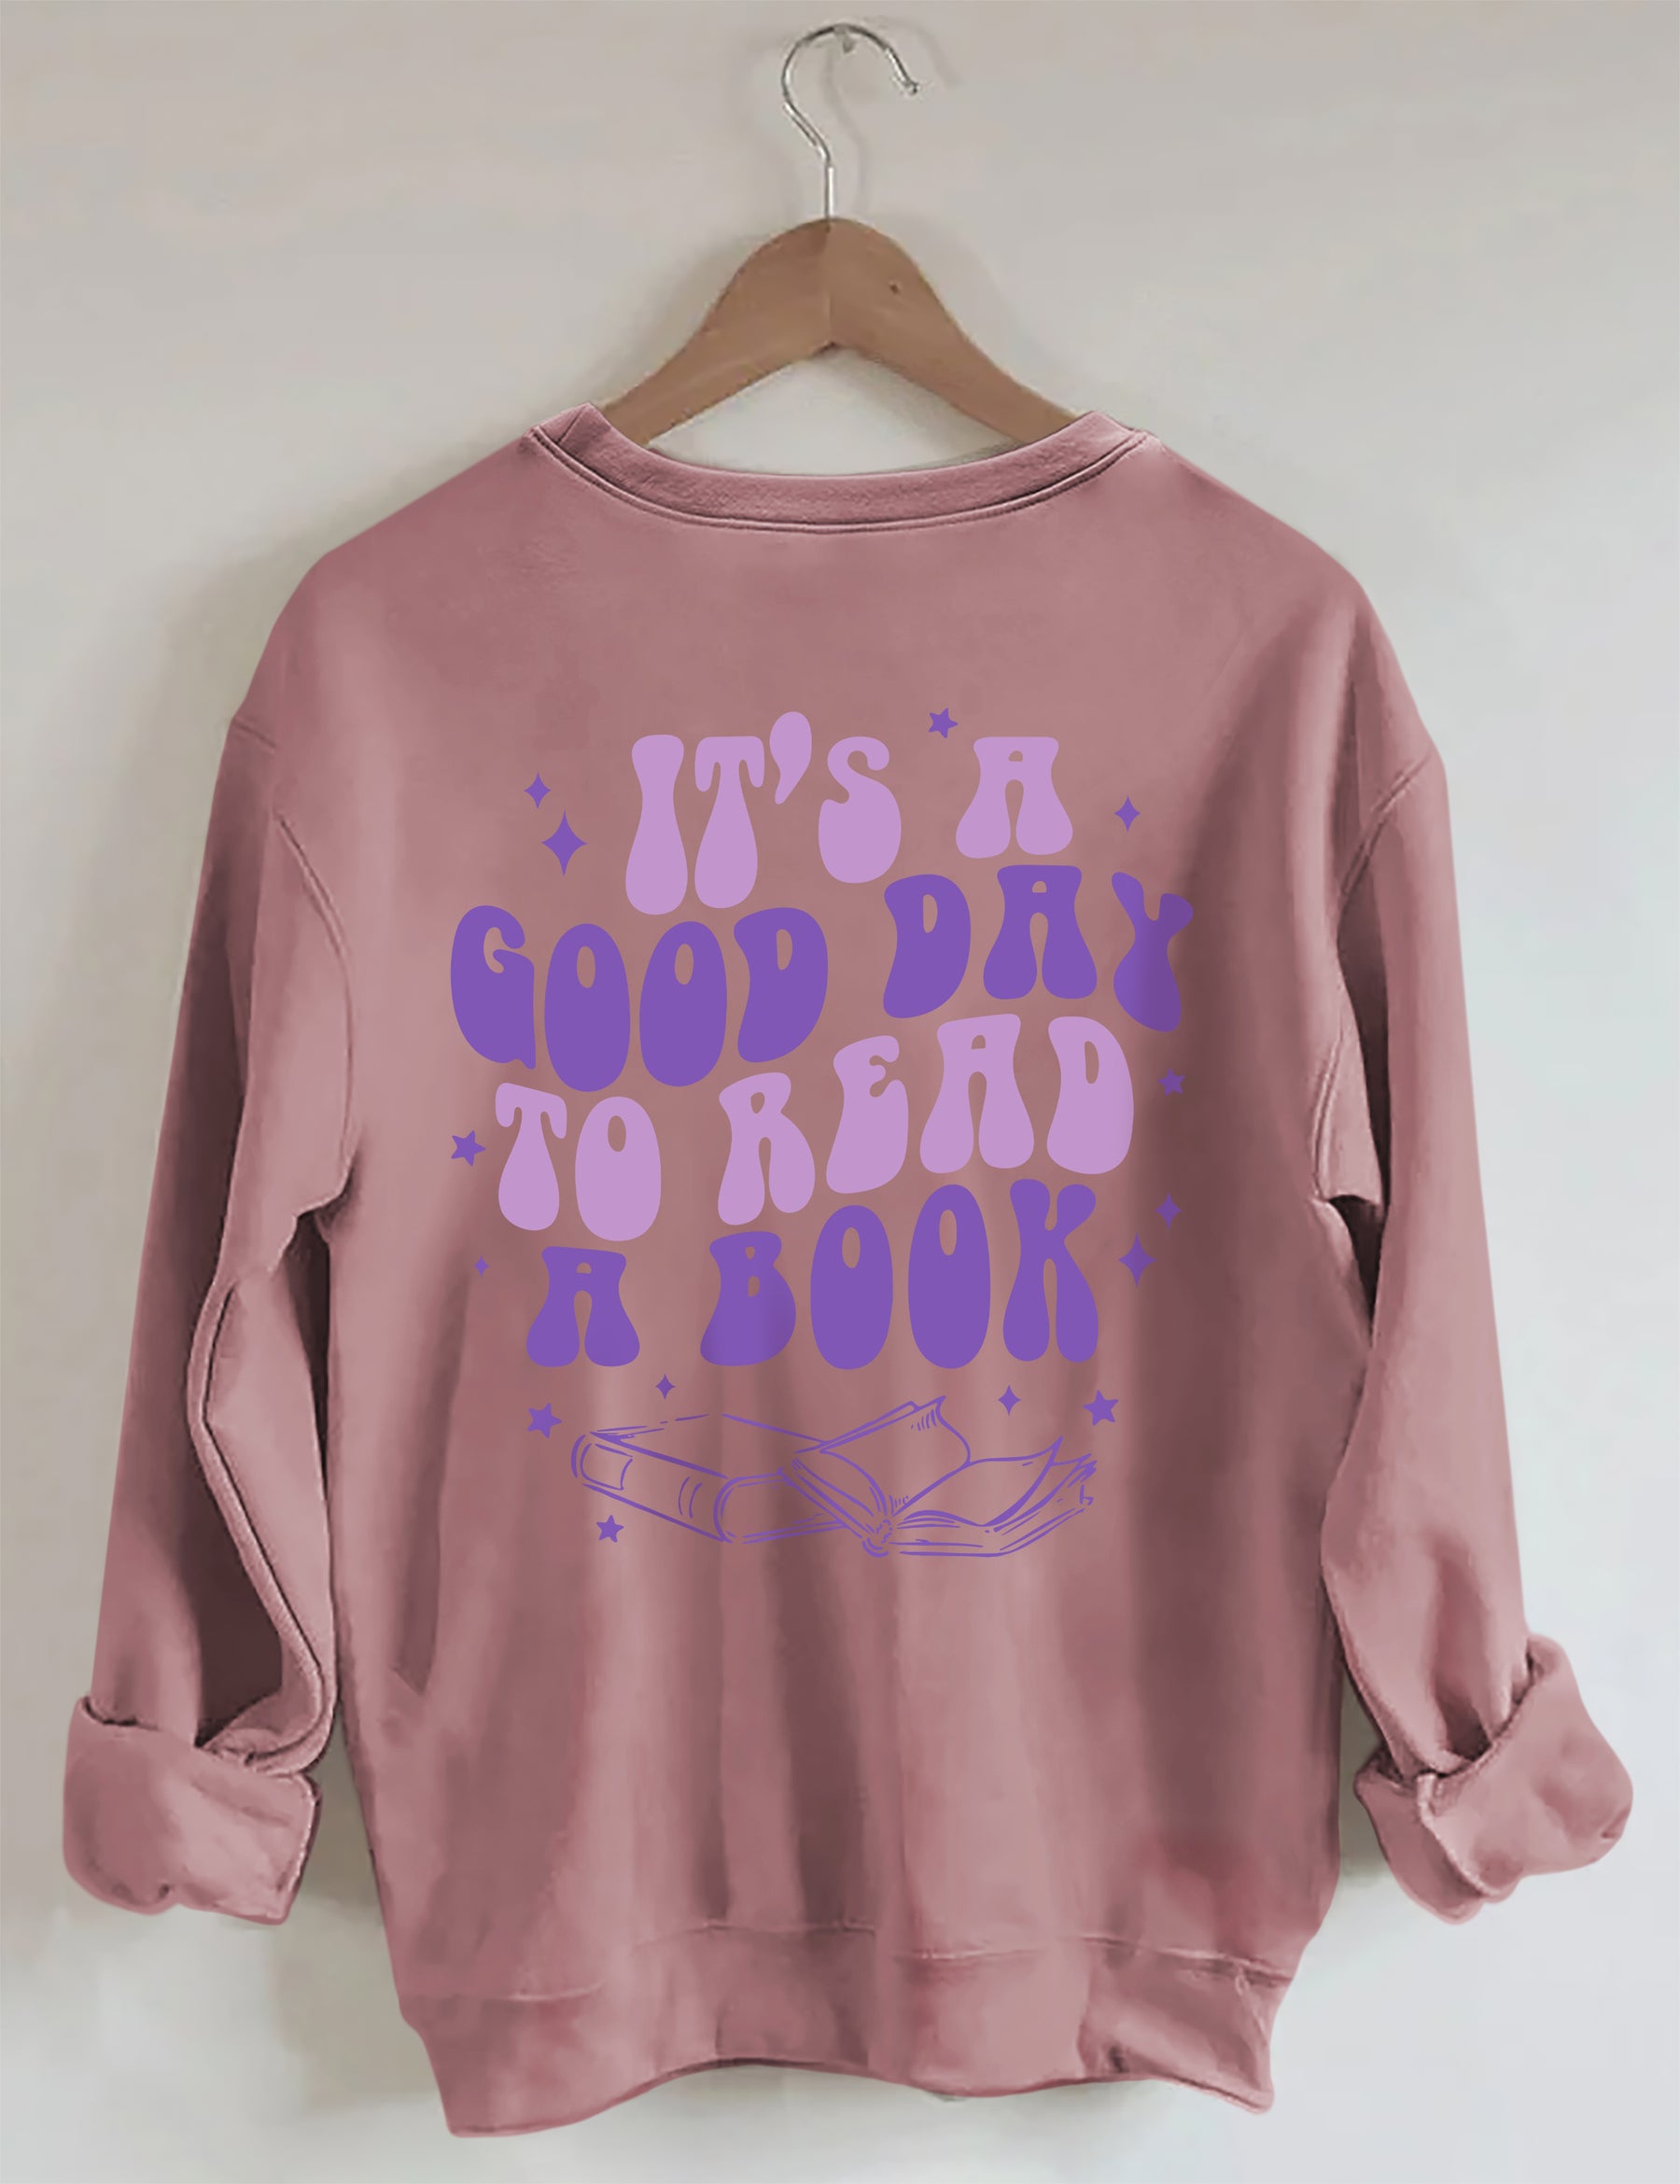 It's A Good Day To Read A Book Sweatshirt